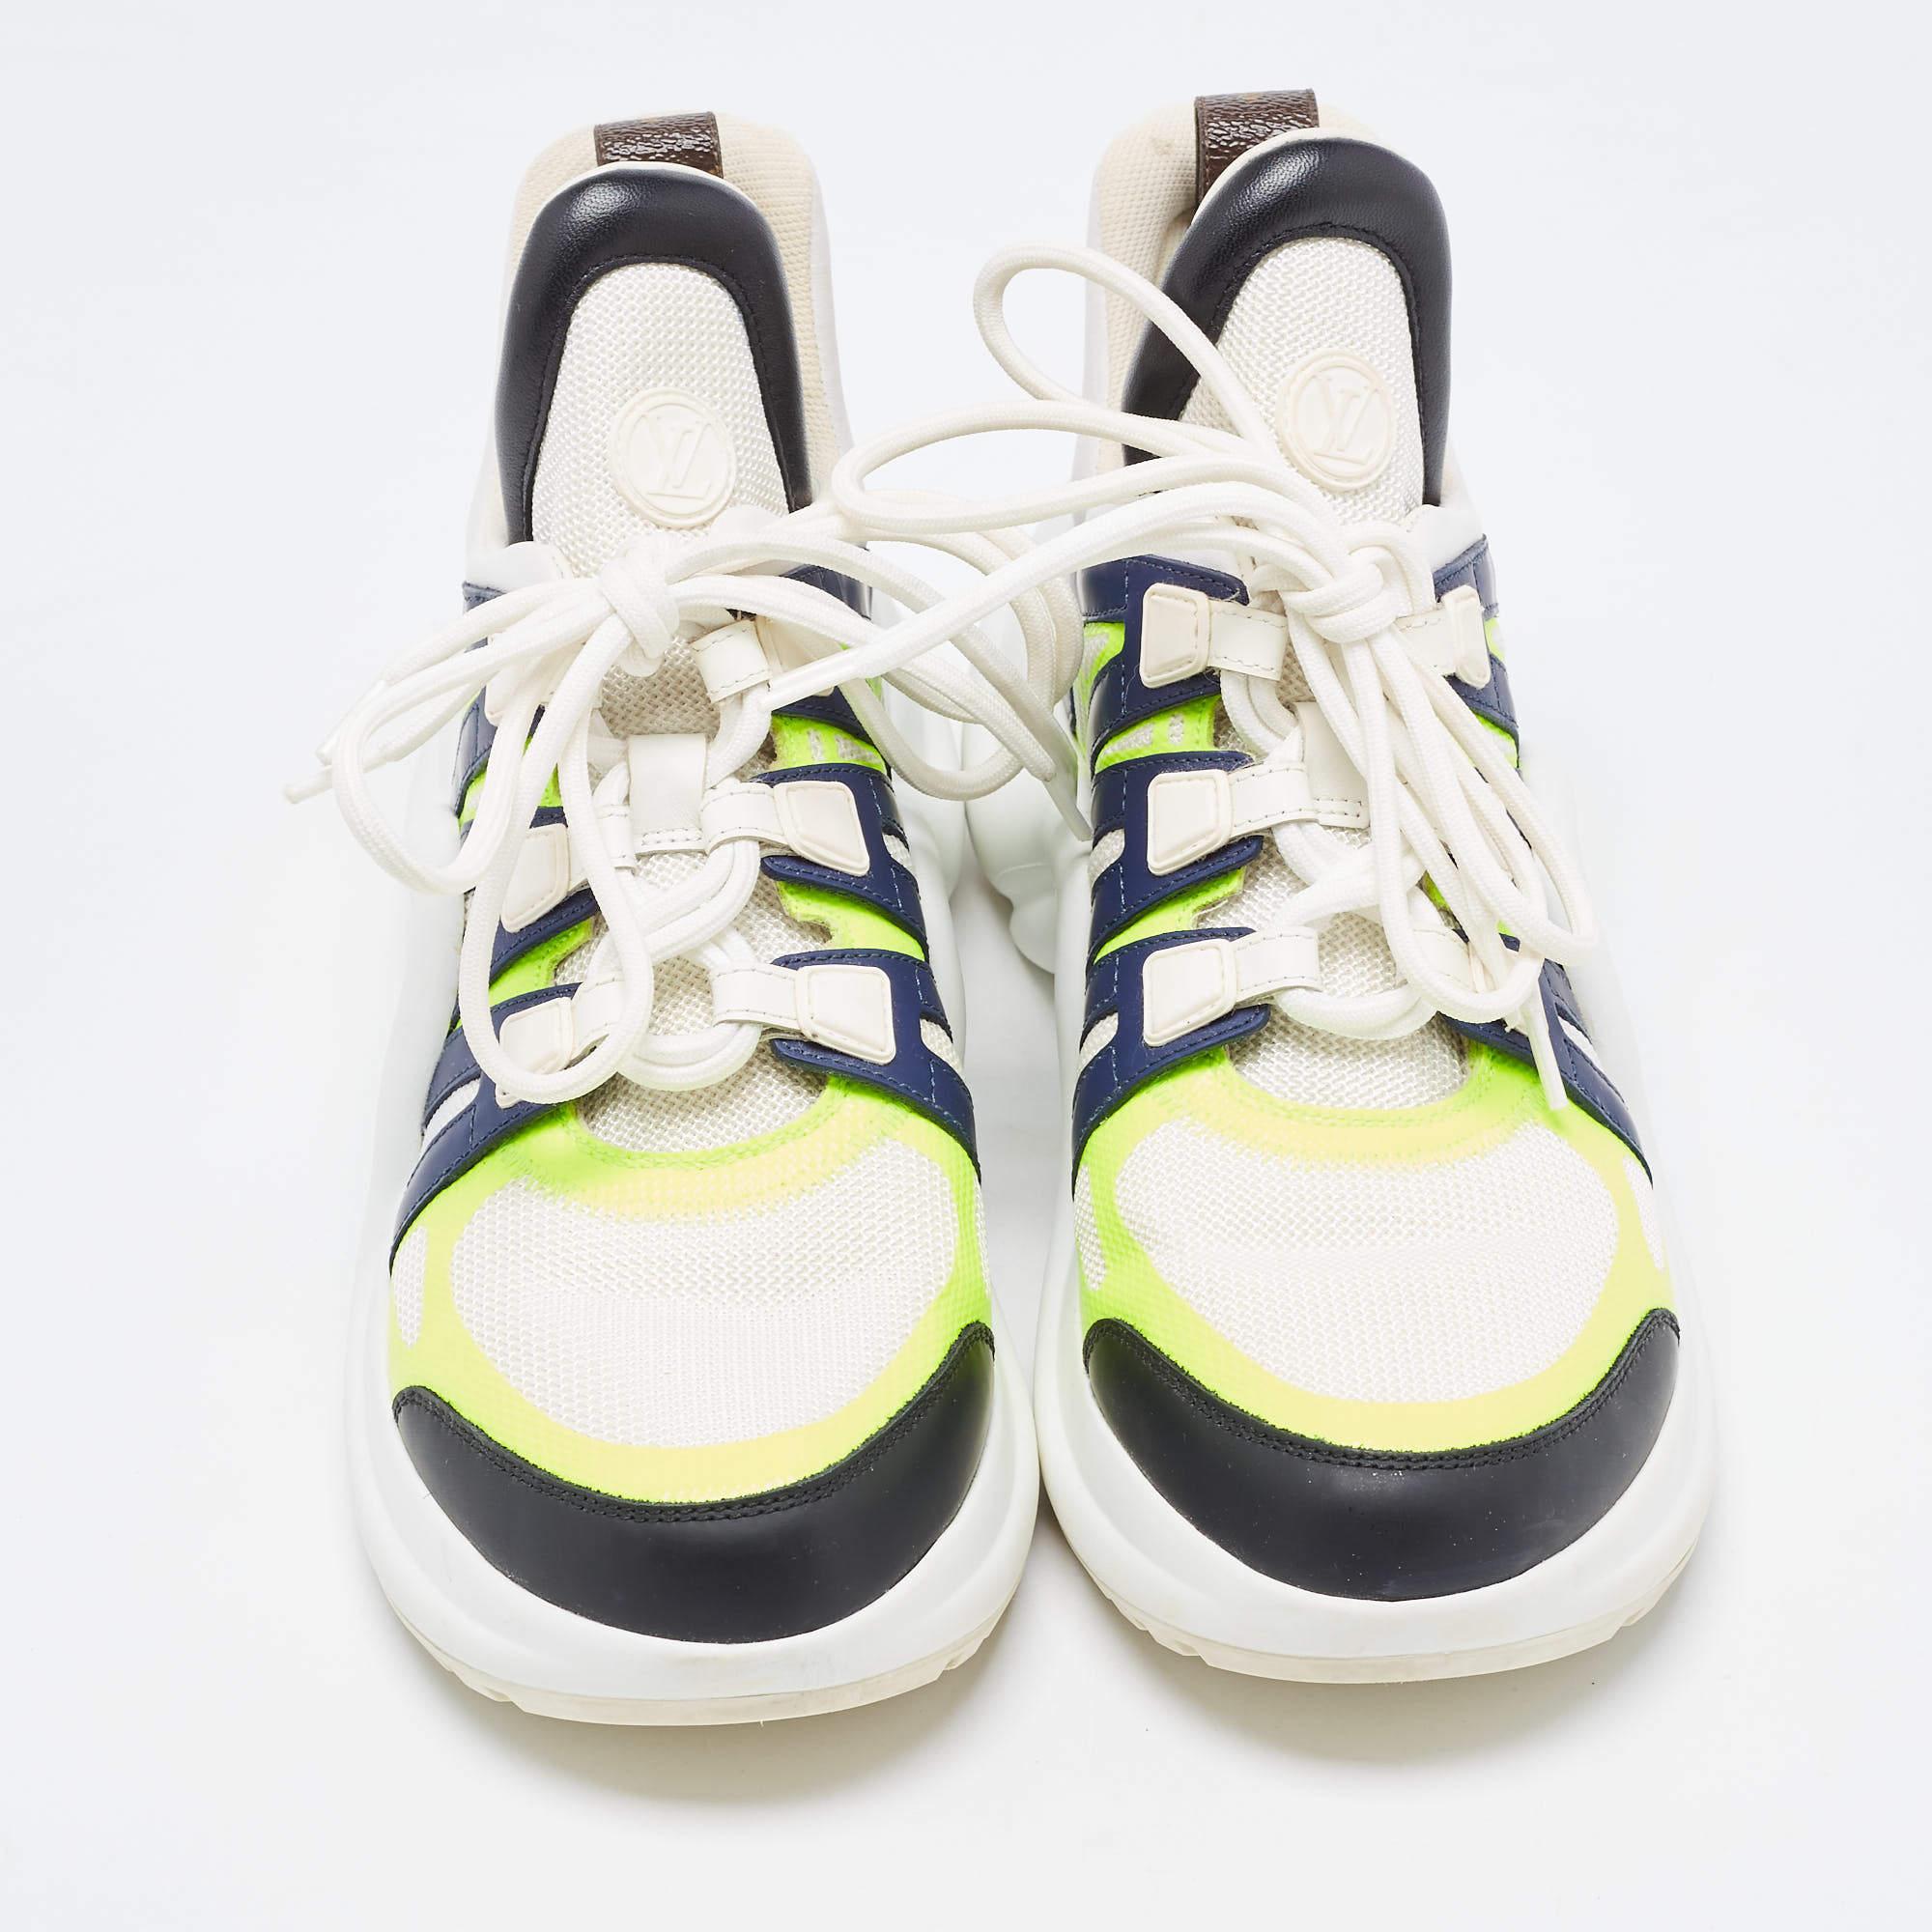 Upgrade your style with these LV Archlight sneakers. Meticulously designed for fashion and comfort, they're the ideal choice for a trendy and comfortable stride.

Includes: Original Dustbag, Original Box, Info Booklet

